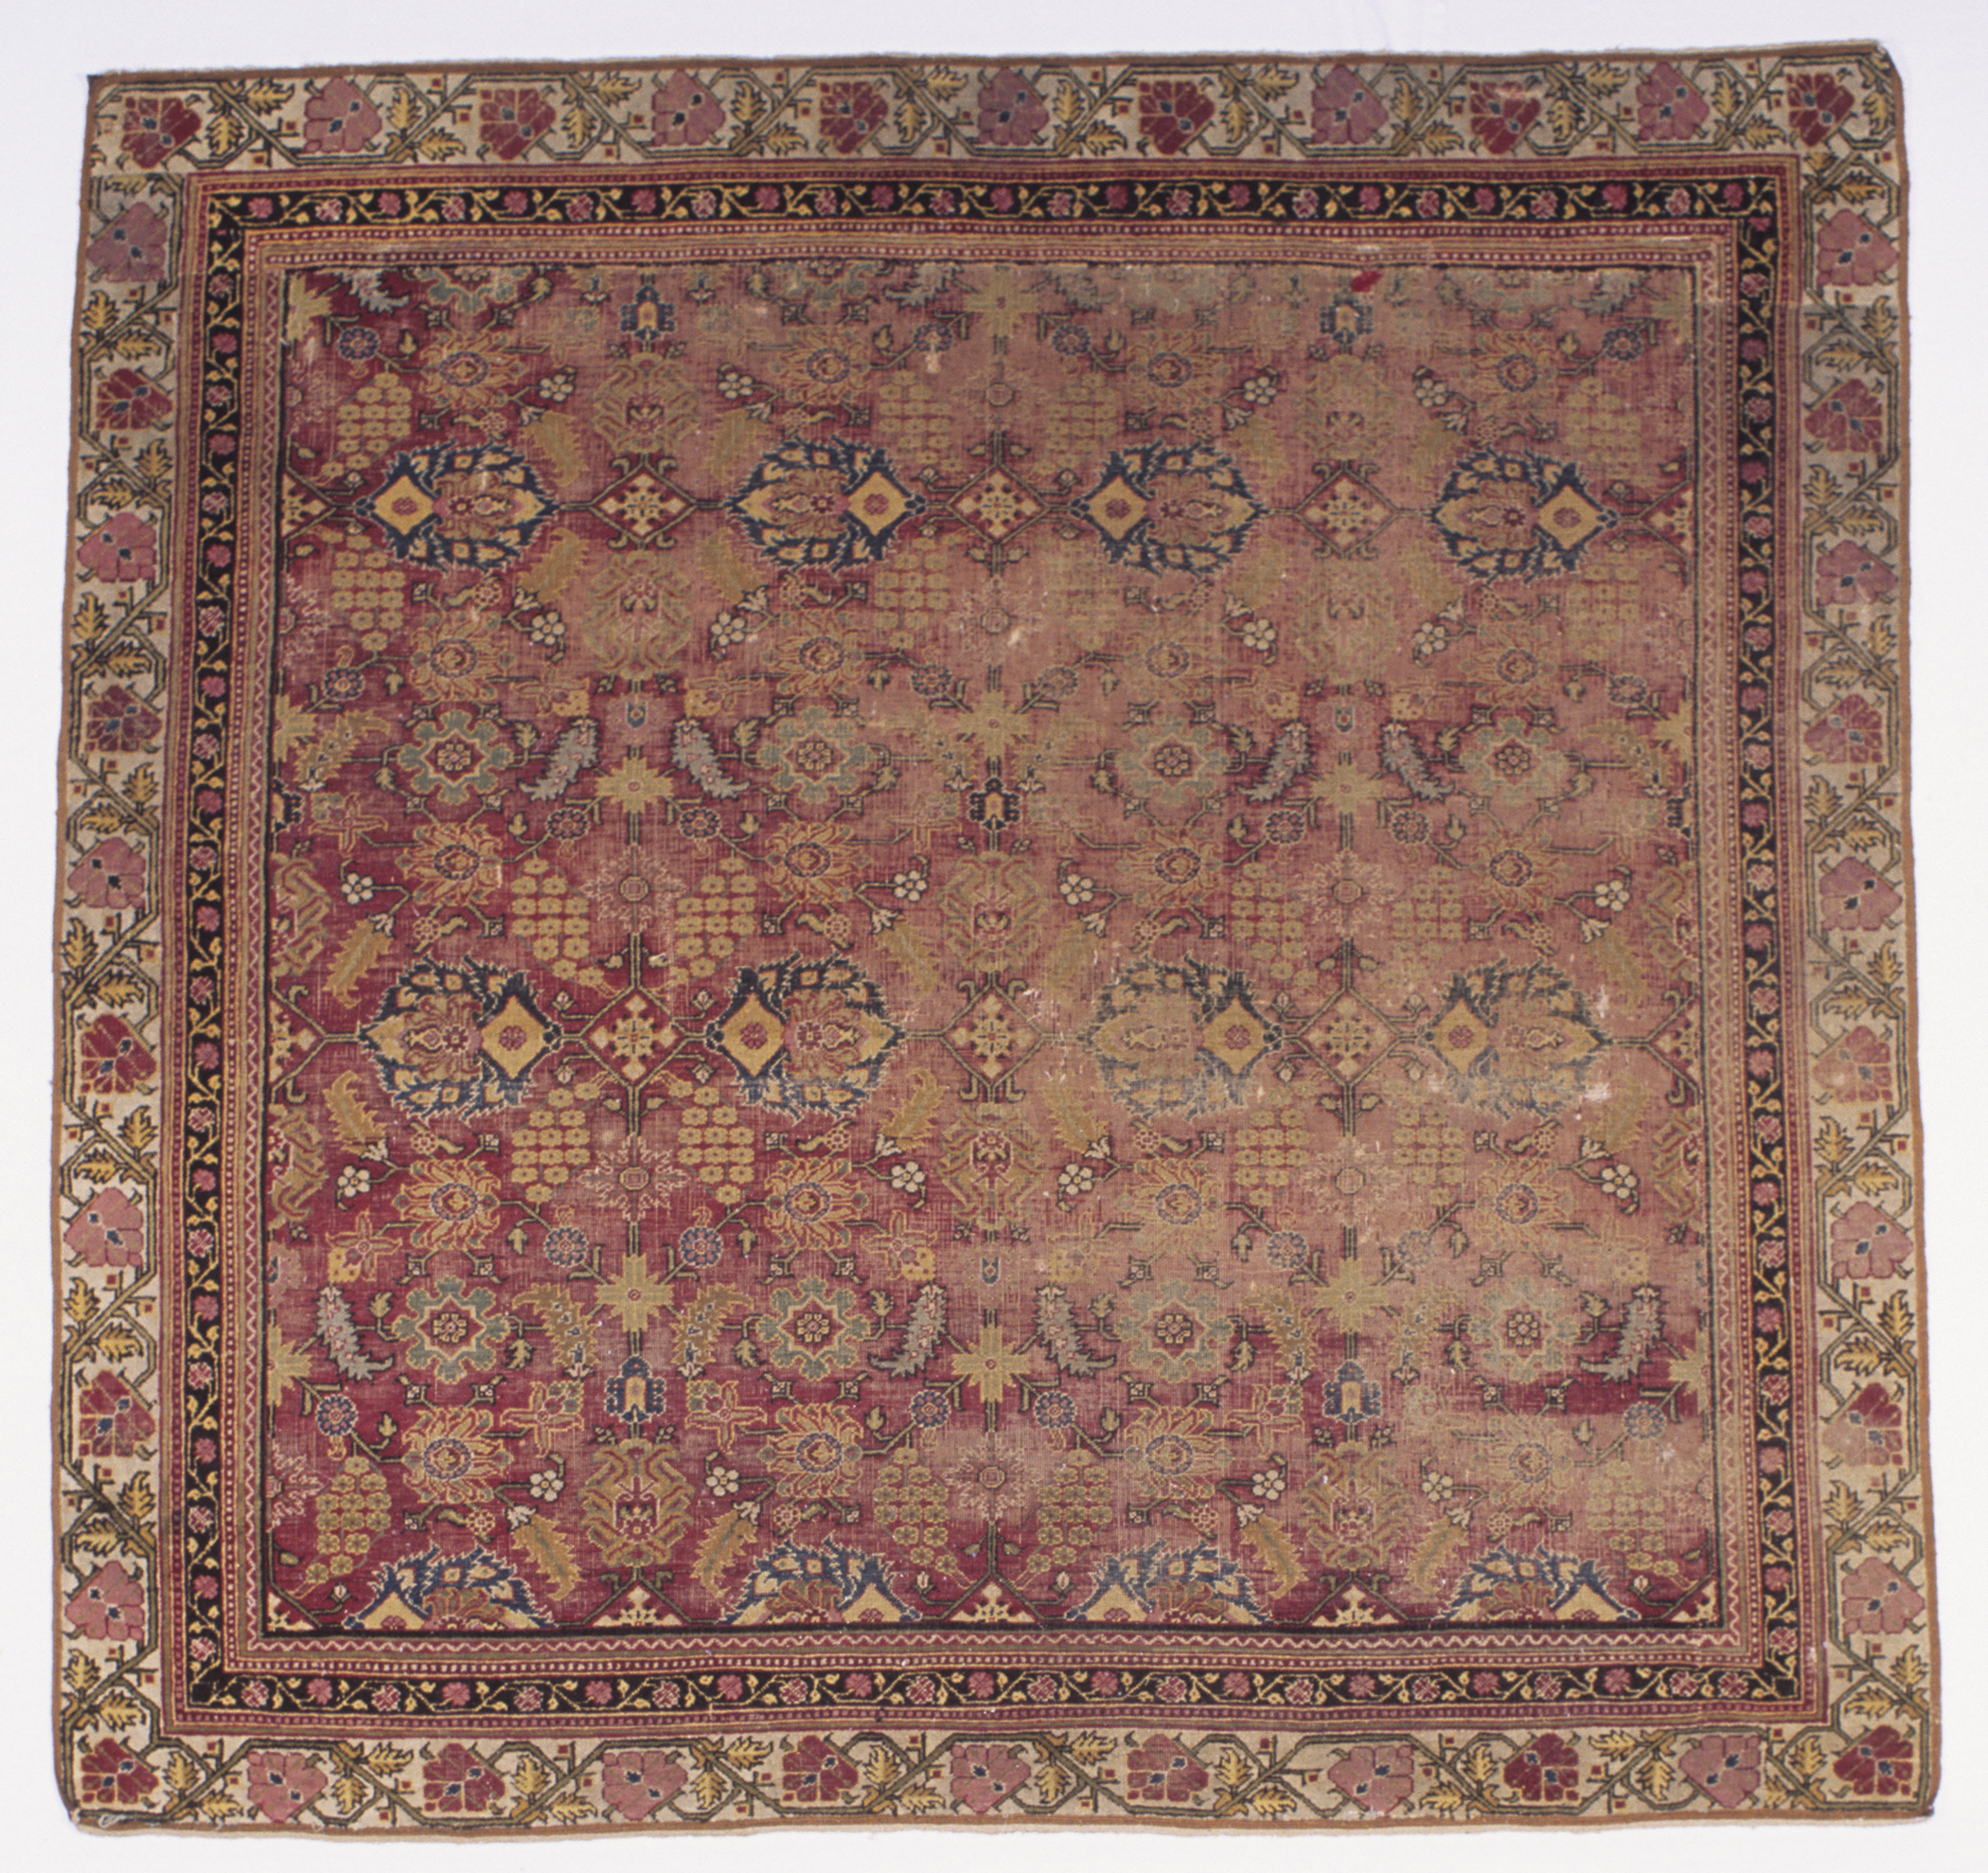 1959.0909 Rug, view 1